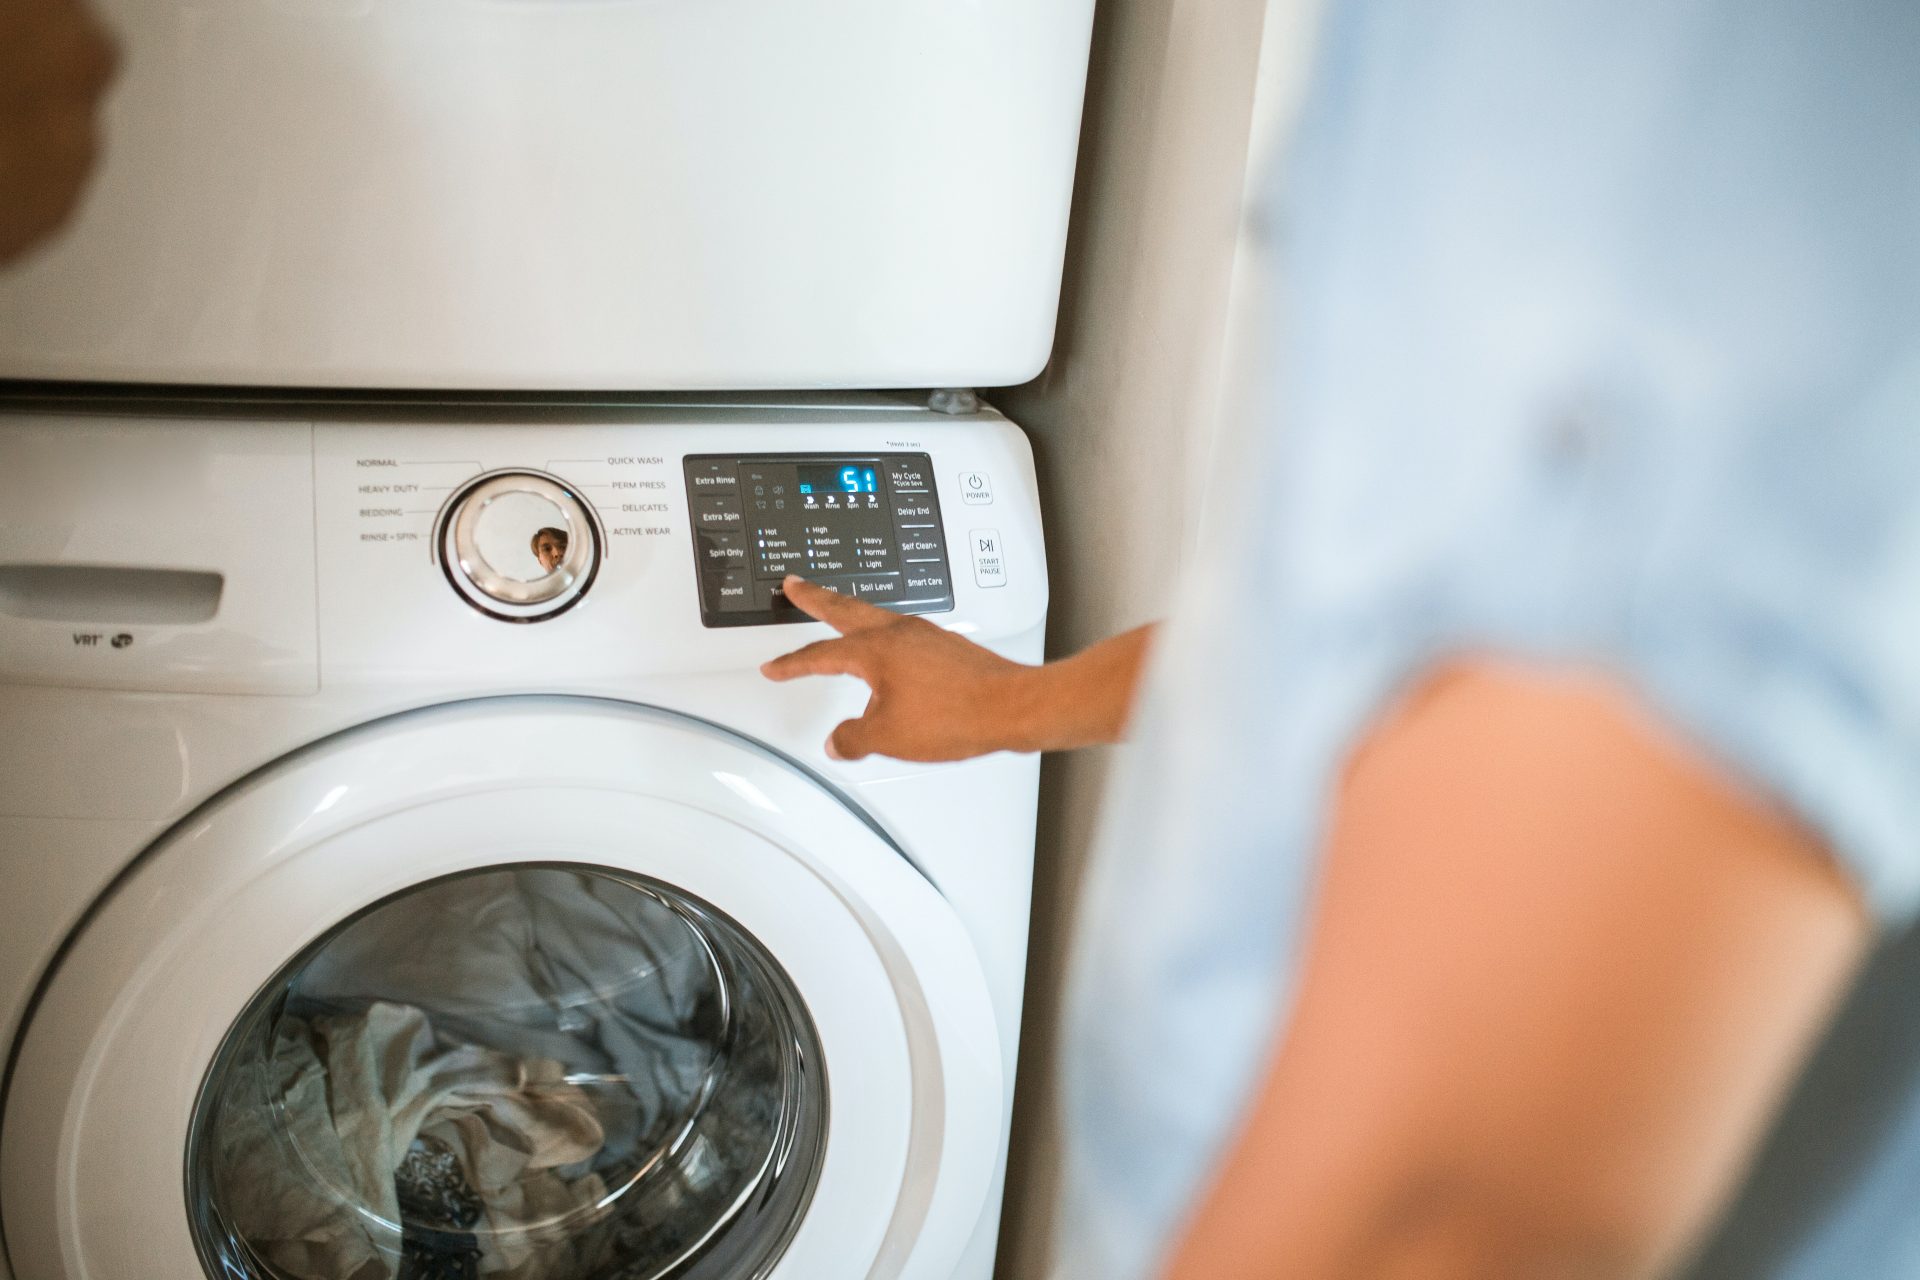 Are Newly Purchased Washing Machines Tested Before Delivery